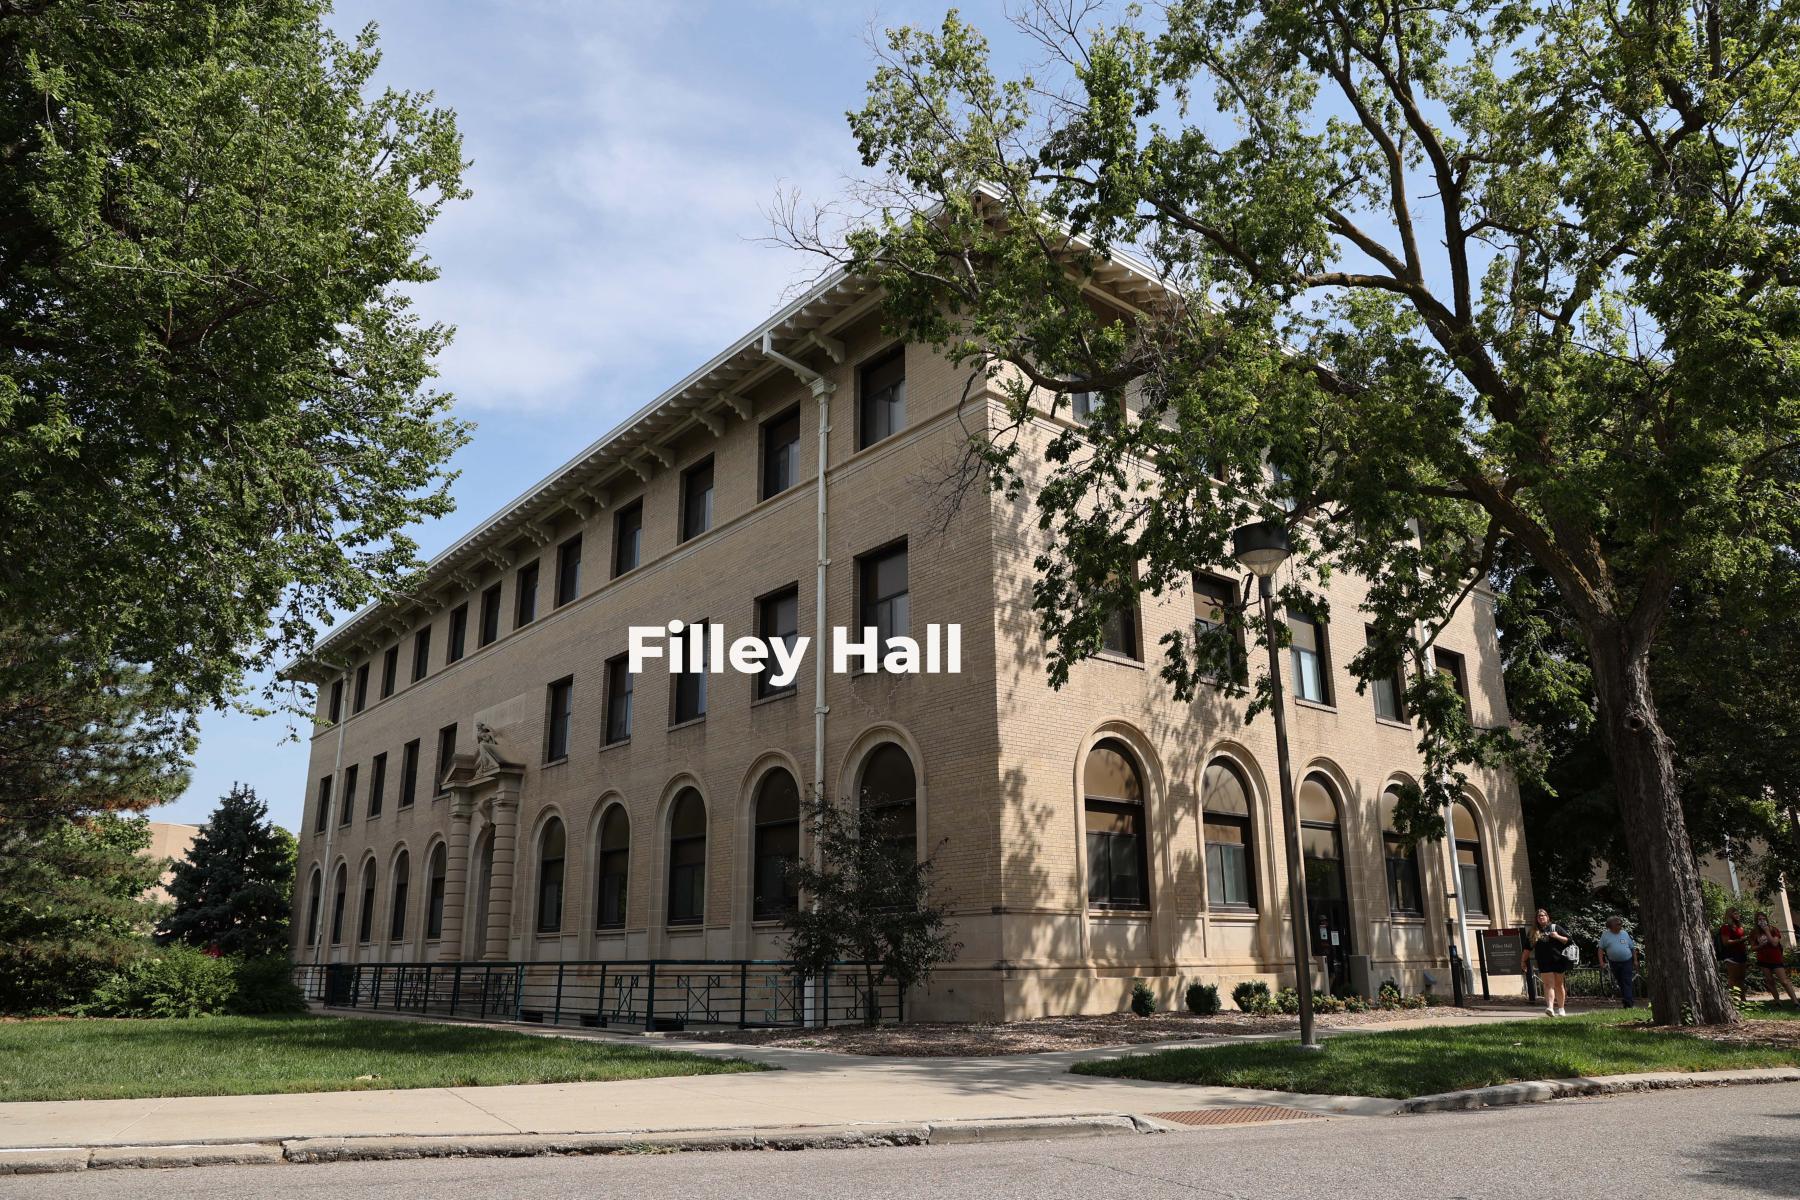 Filley Hall